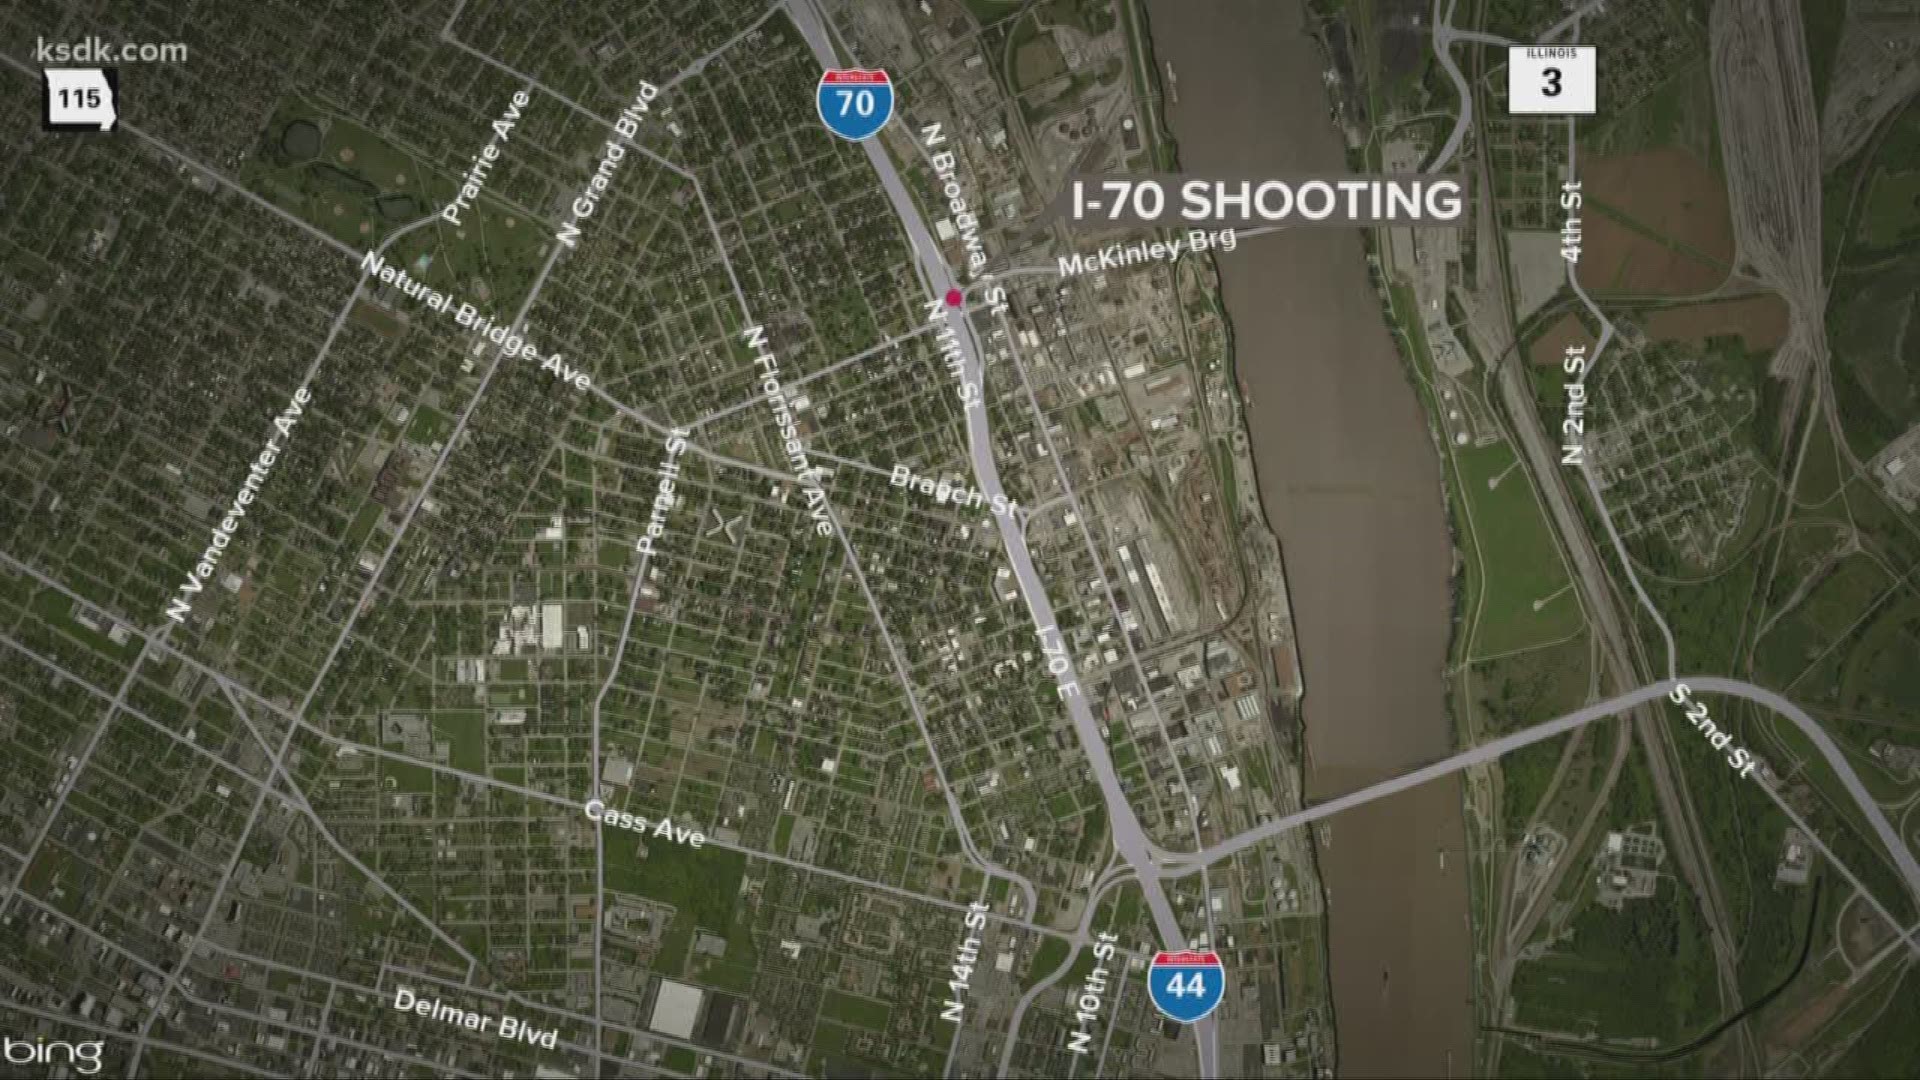 Both shootings took place within 30 minutes of each other.